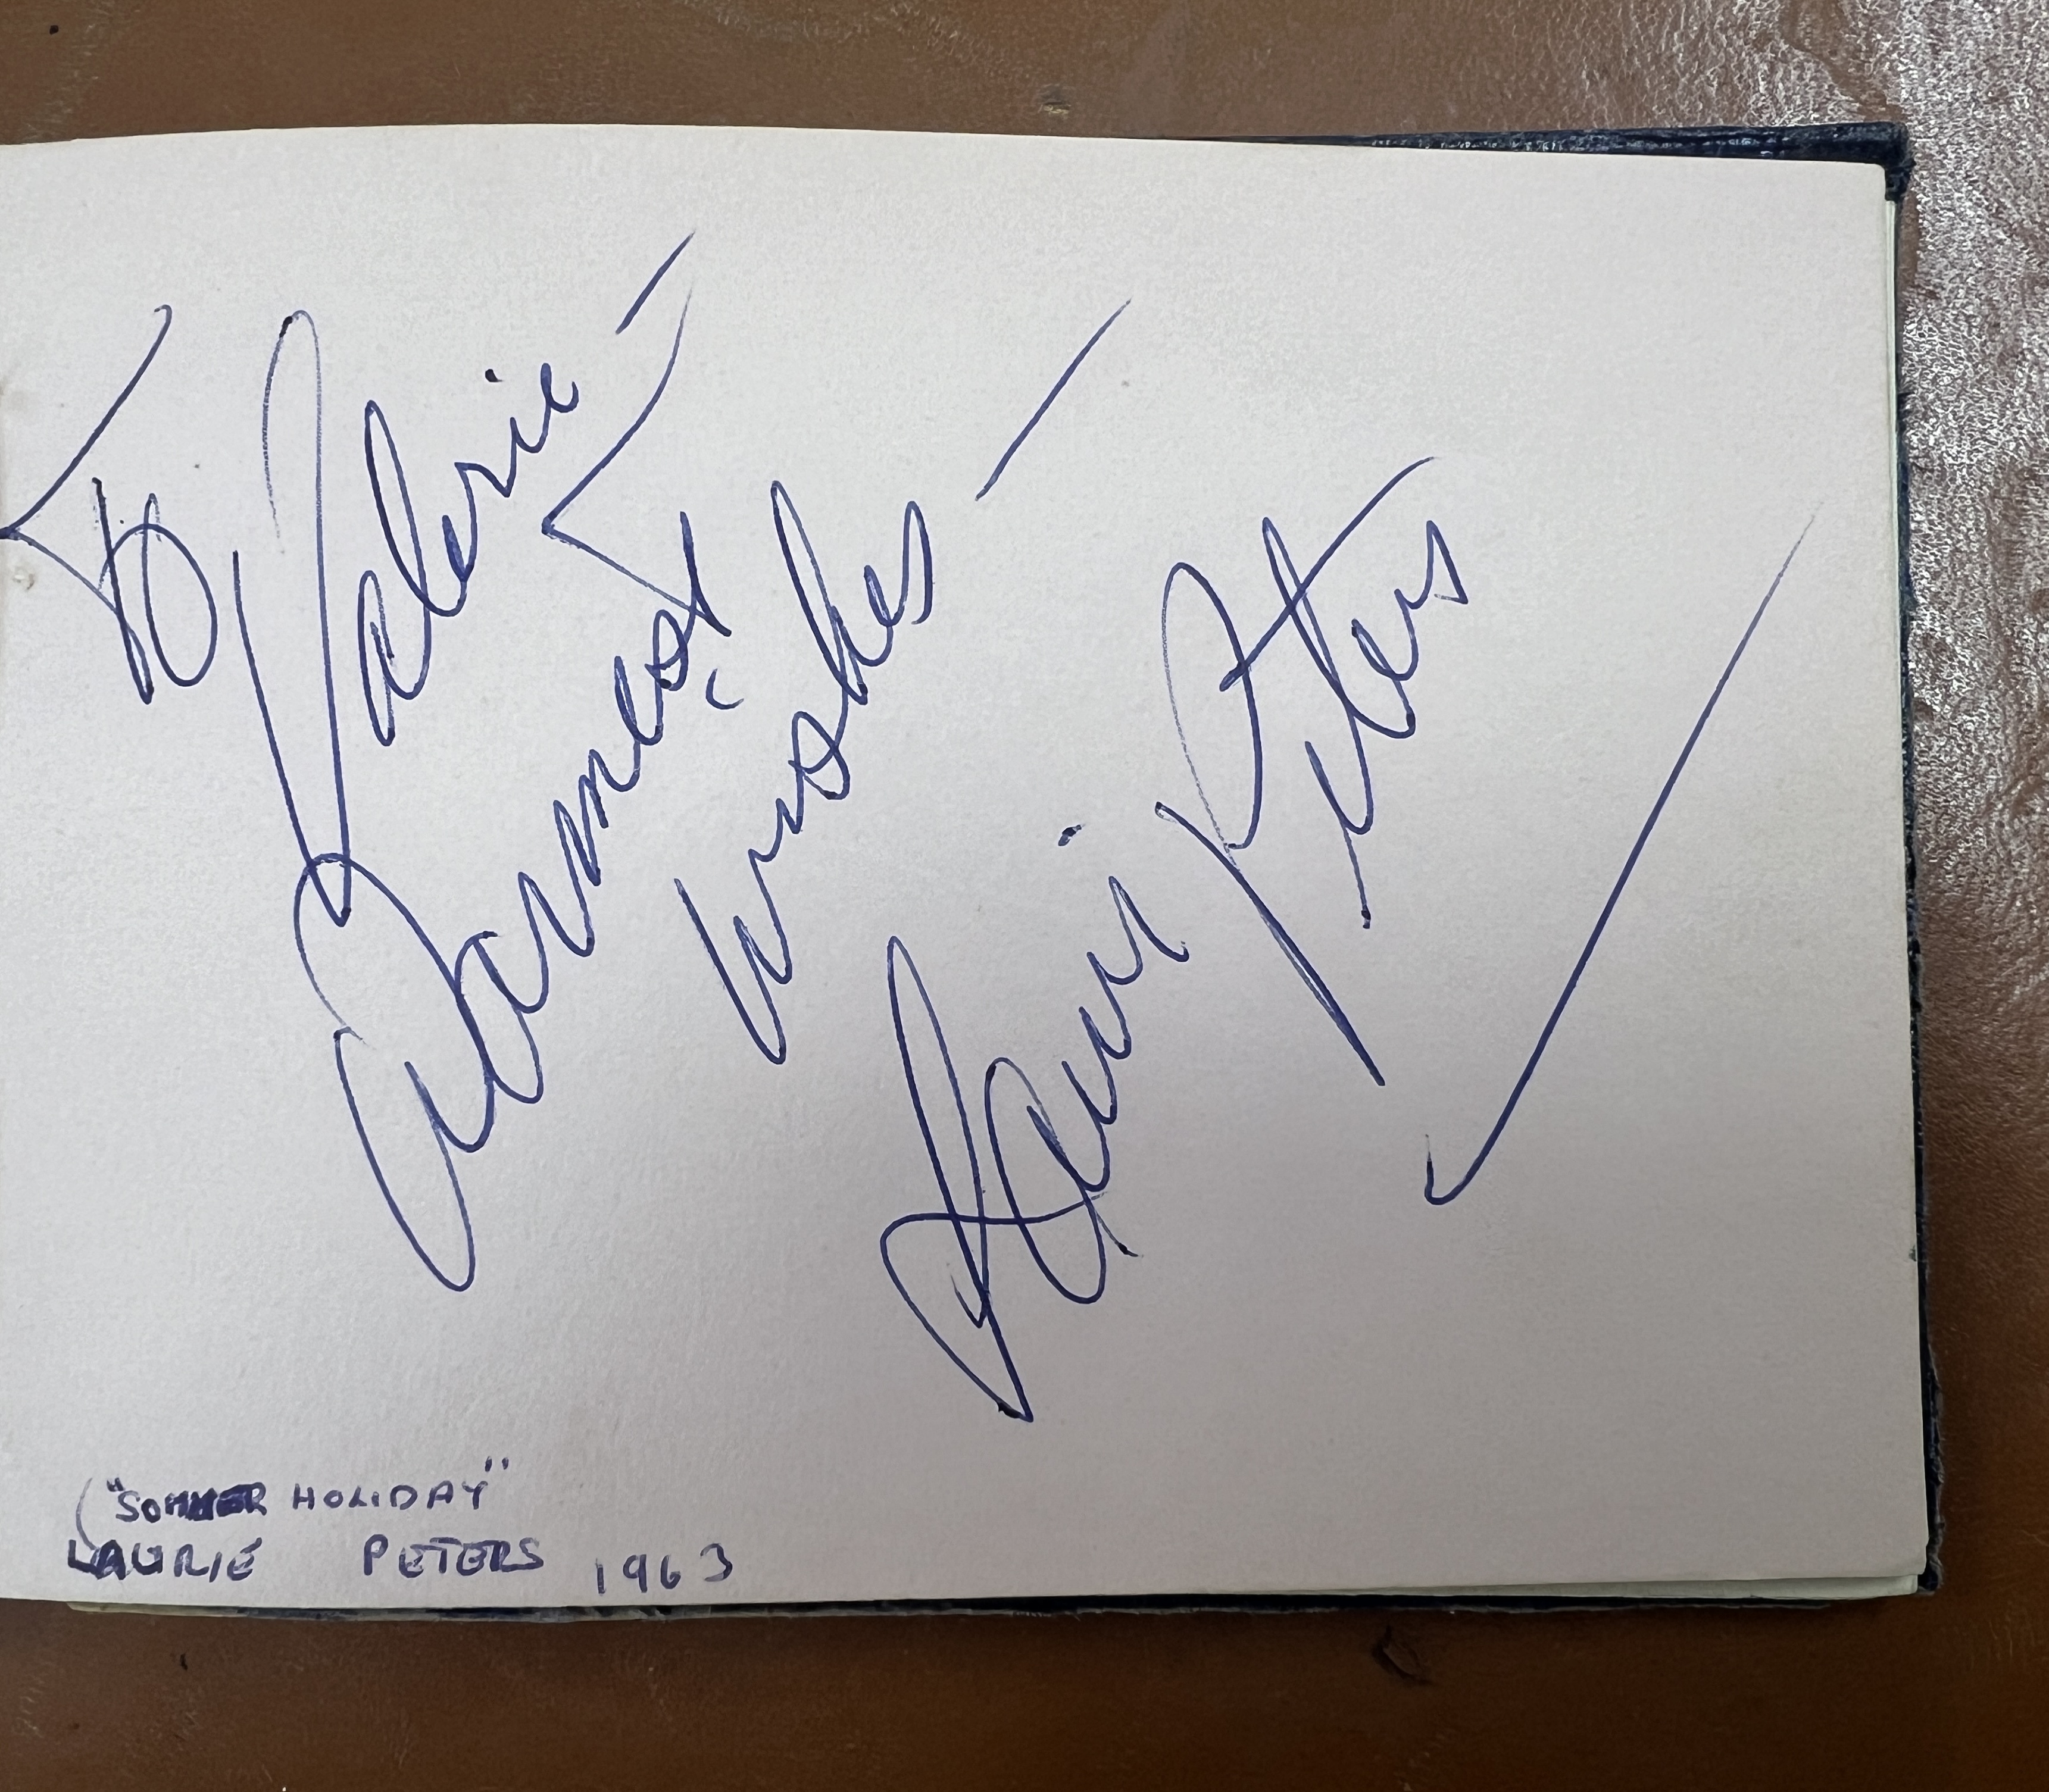 A 1960's autograph album containing autographs of various celebrities including Cliff Richard, - Image 24 of 37